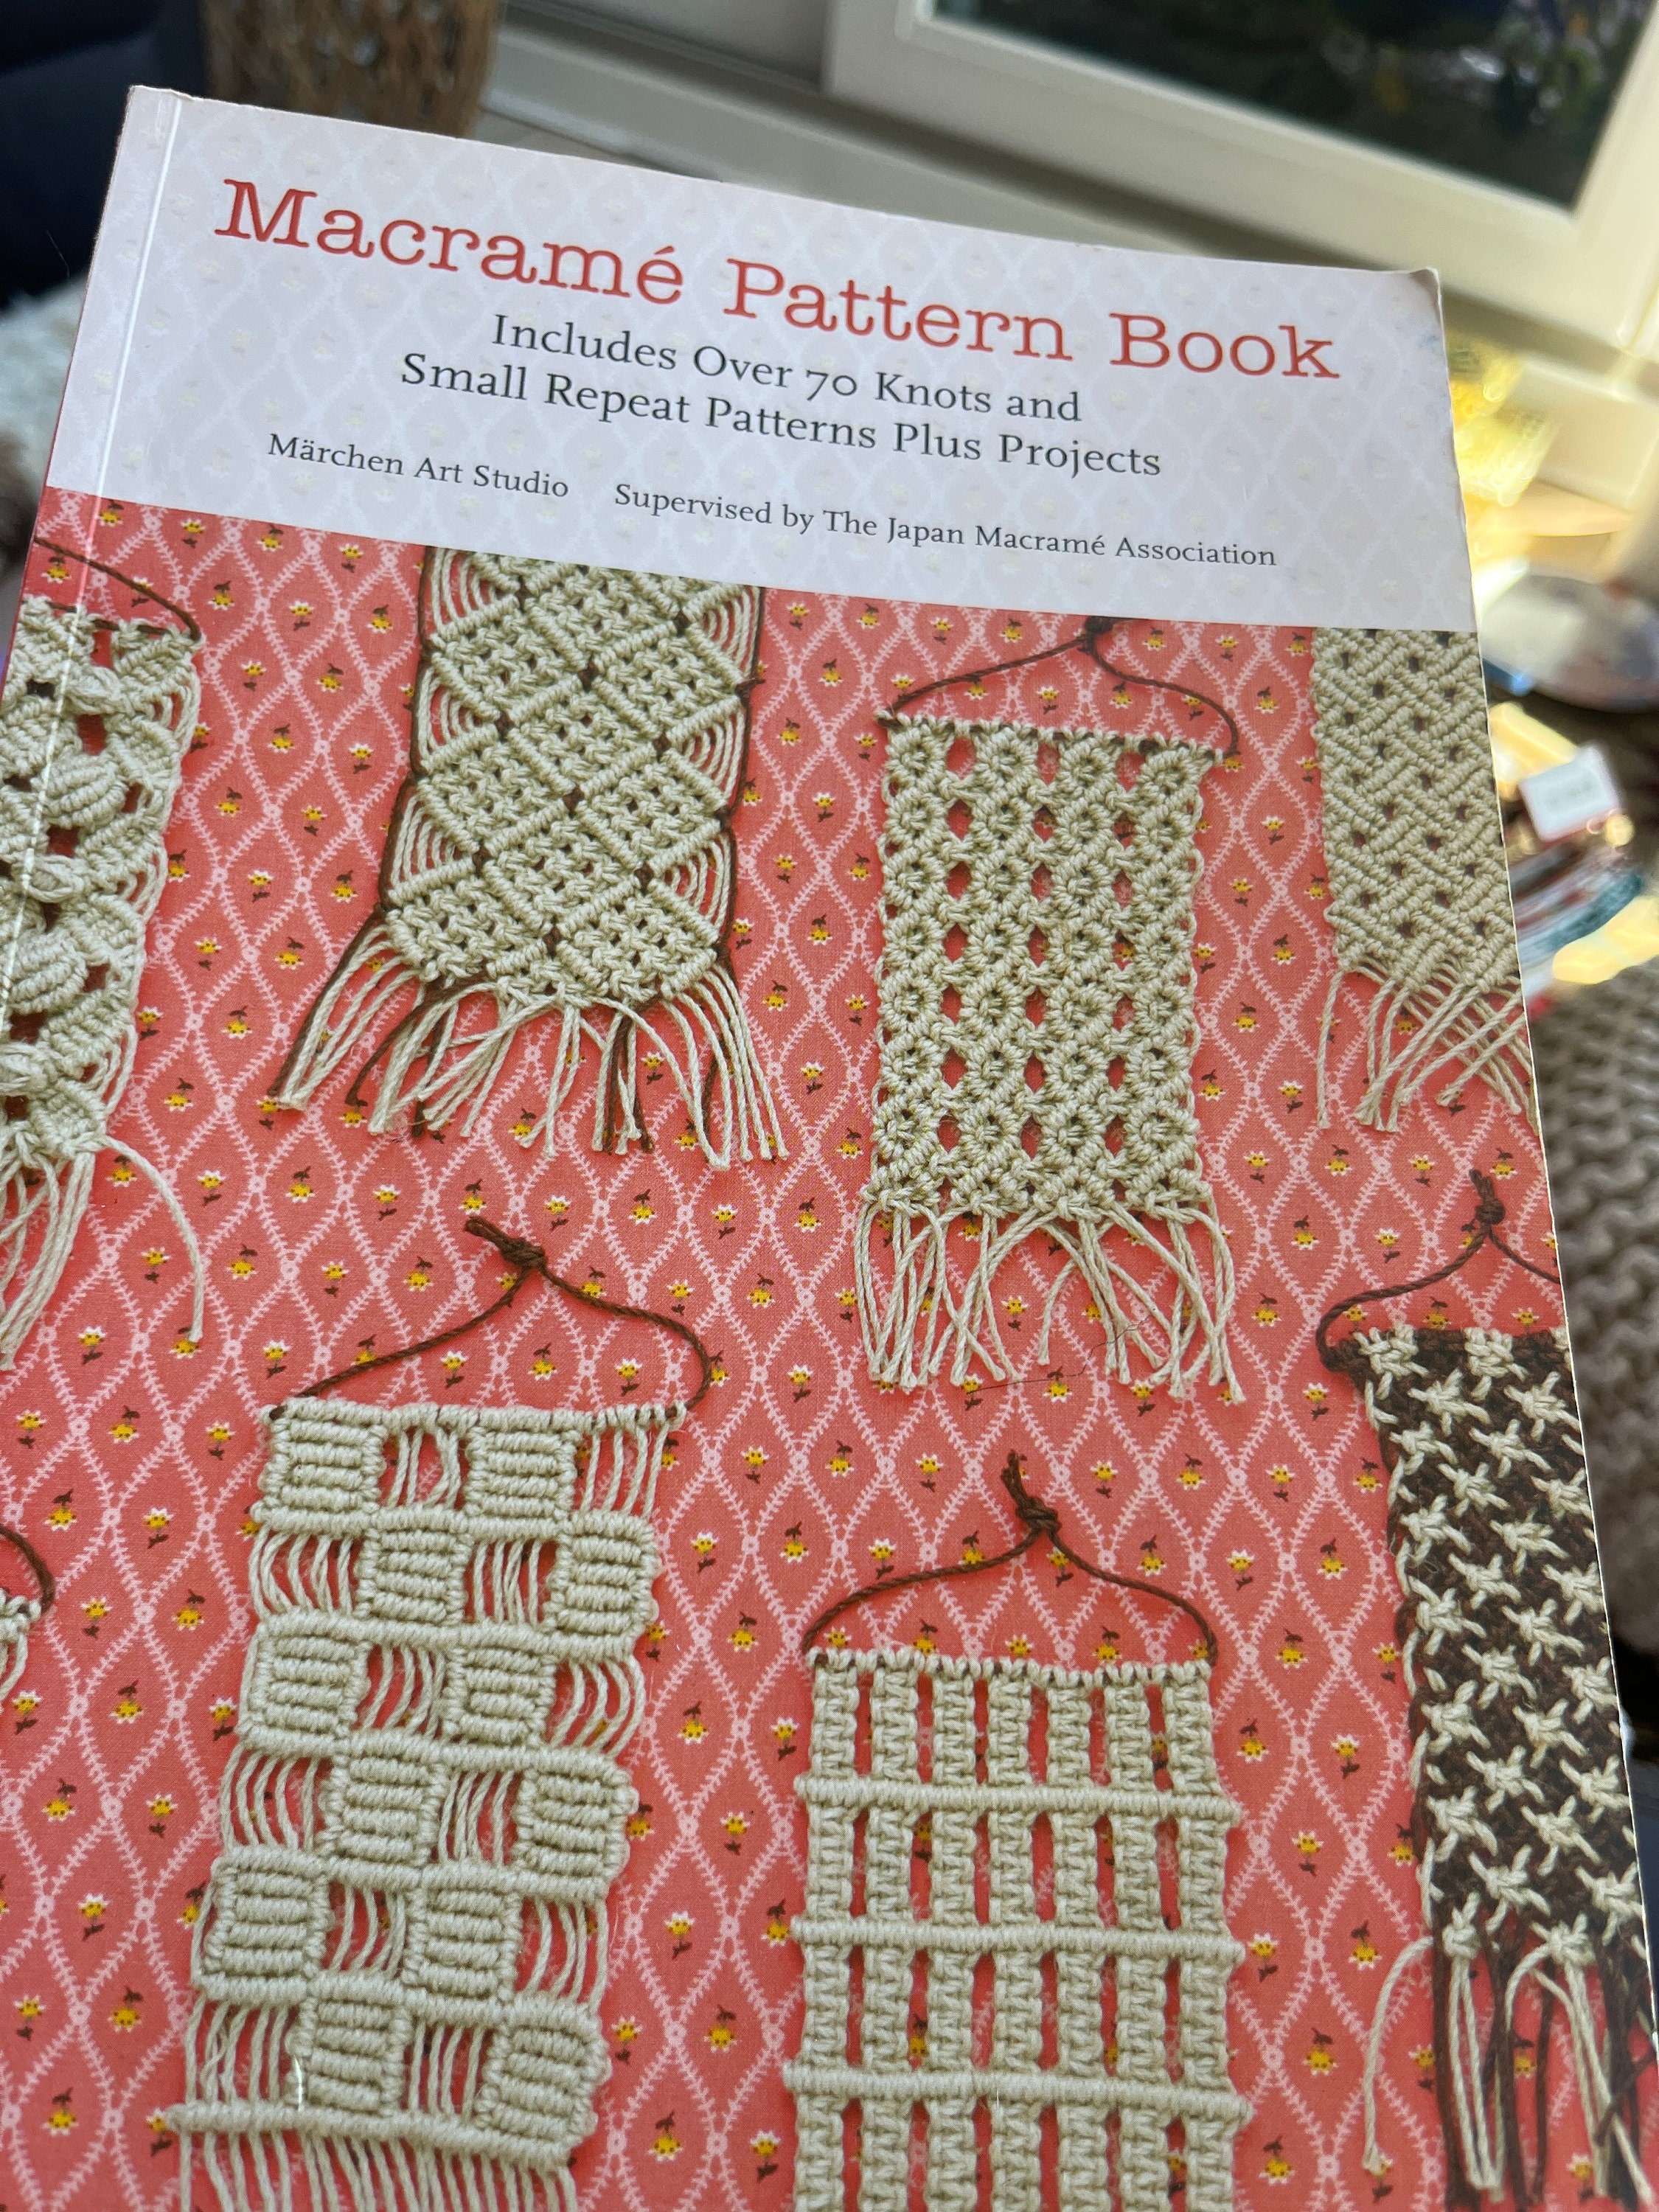 Macramé Pattern Book: Includes Over 70 Knots and Small Repeat Patterns Plus  Projects 